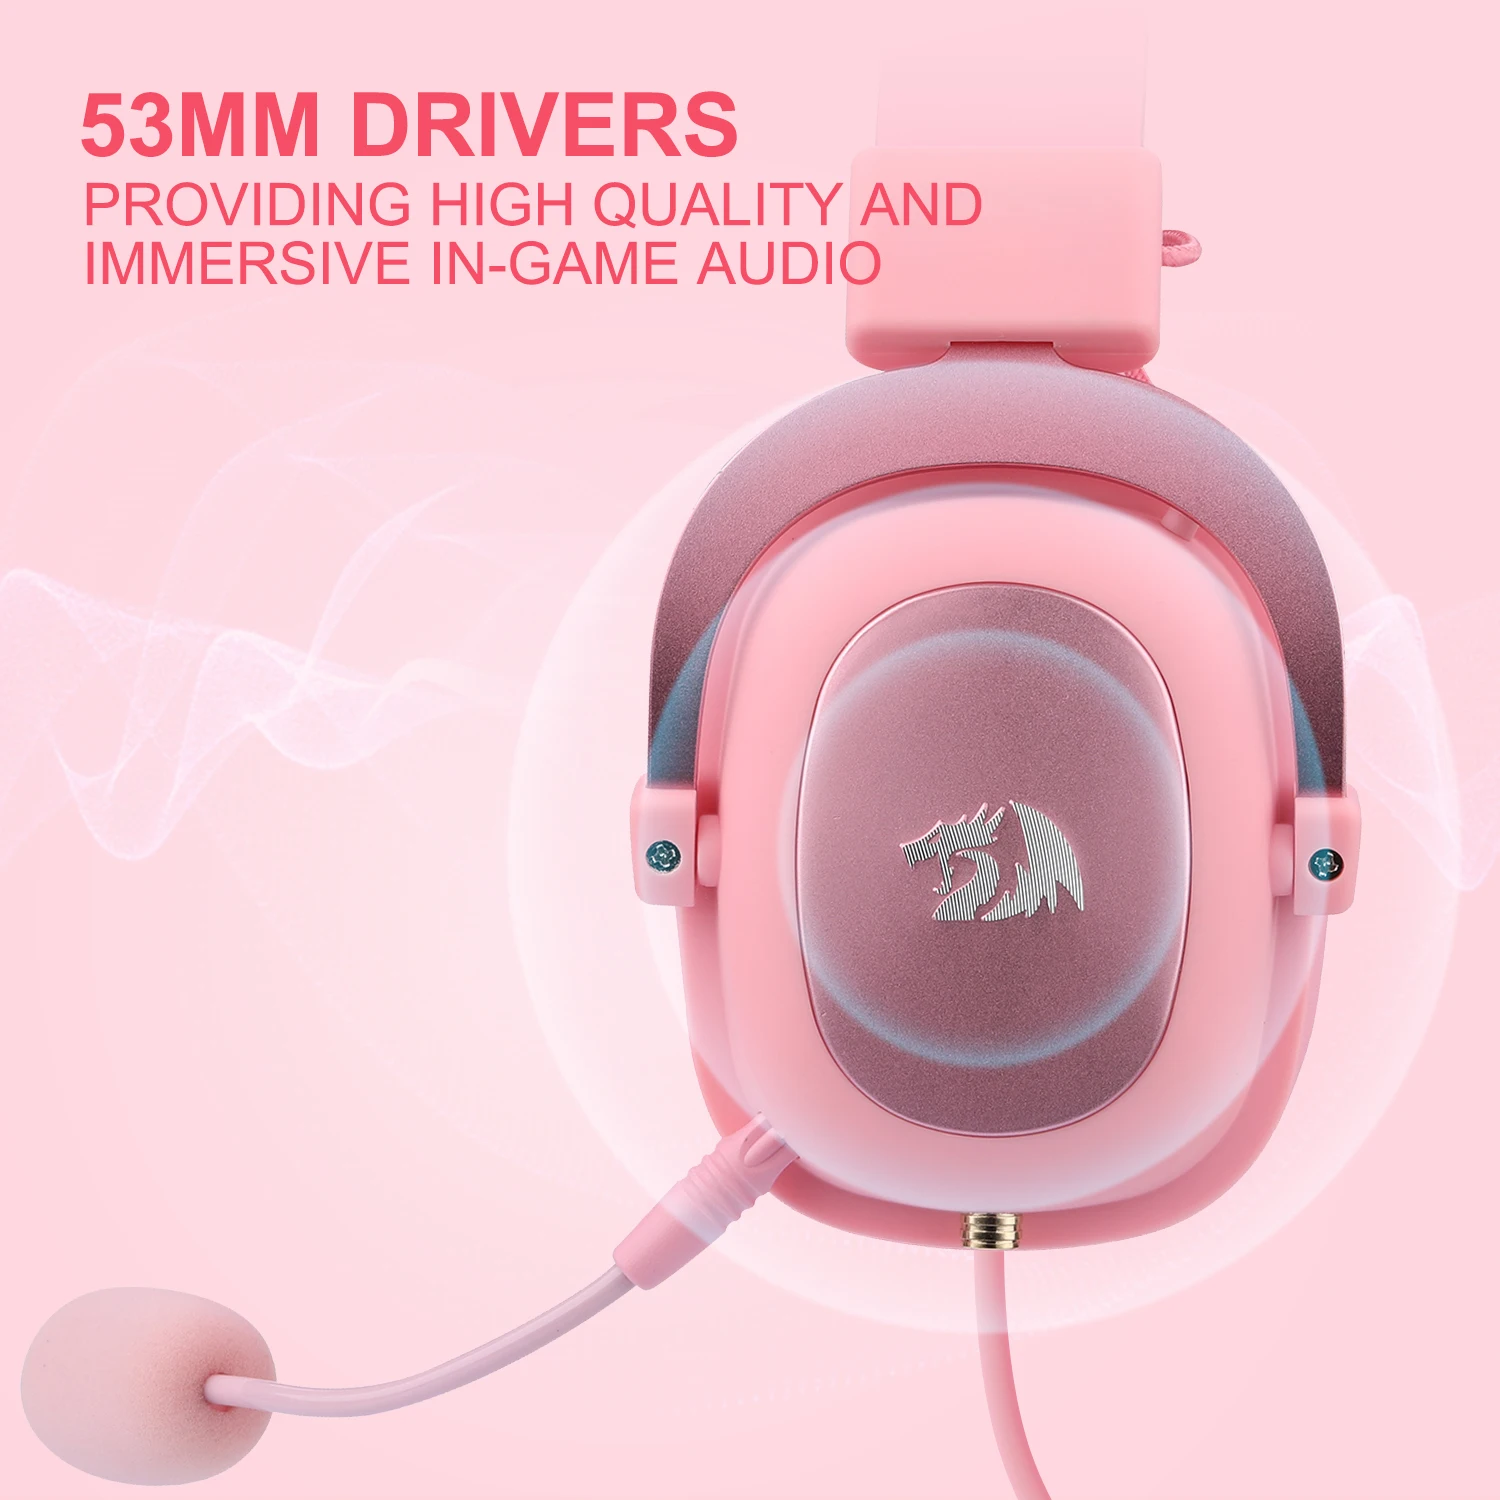 REDRAGON ZEUS 2 H510 Wired Gaming USB Pink Headset 7.1 Surround Computing Headset Detachable Microphone for PS5/4 Xbox One enlarge